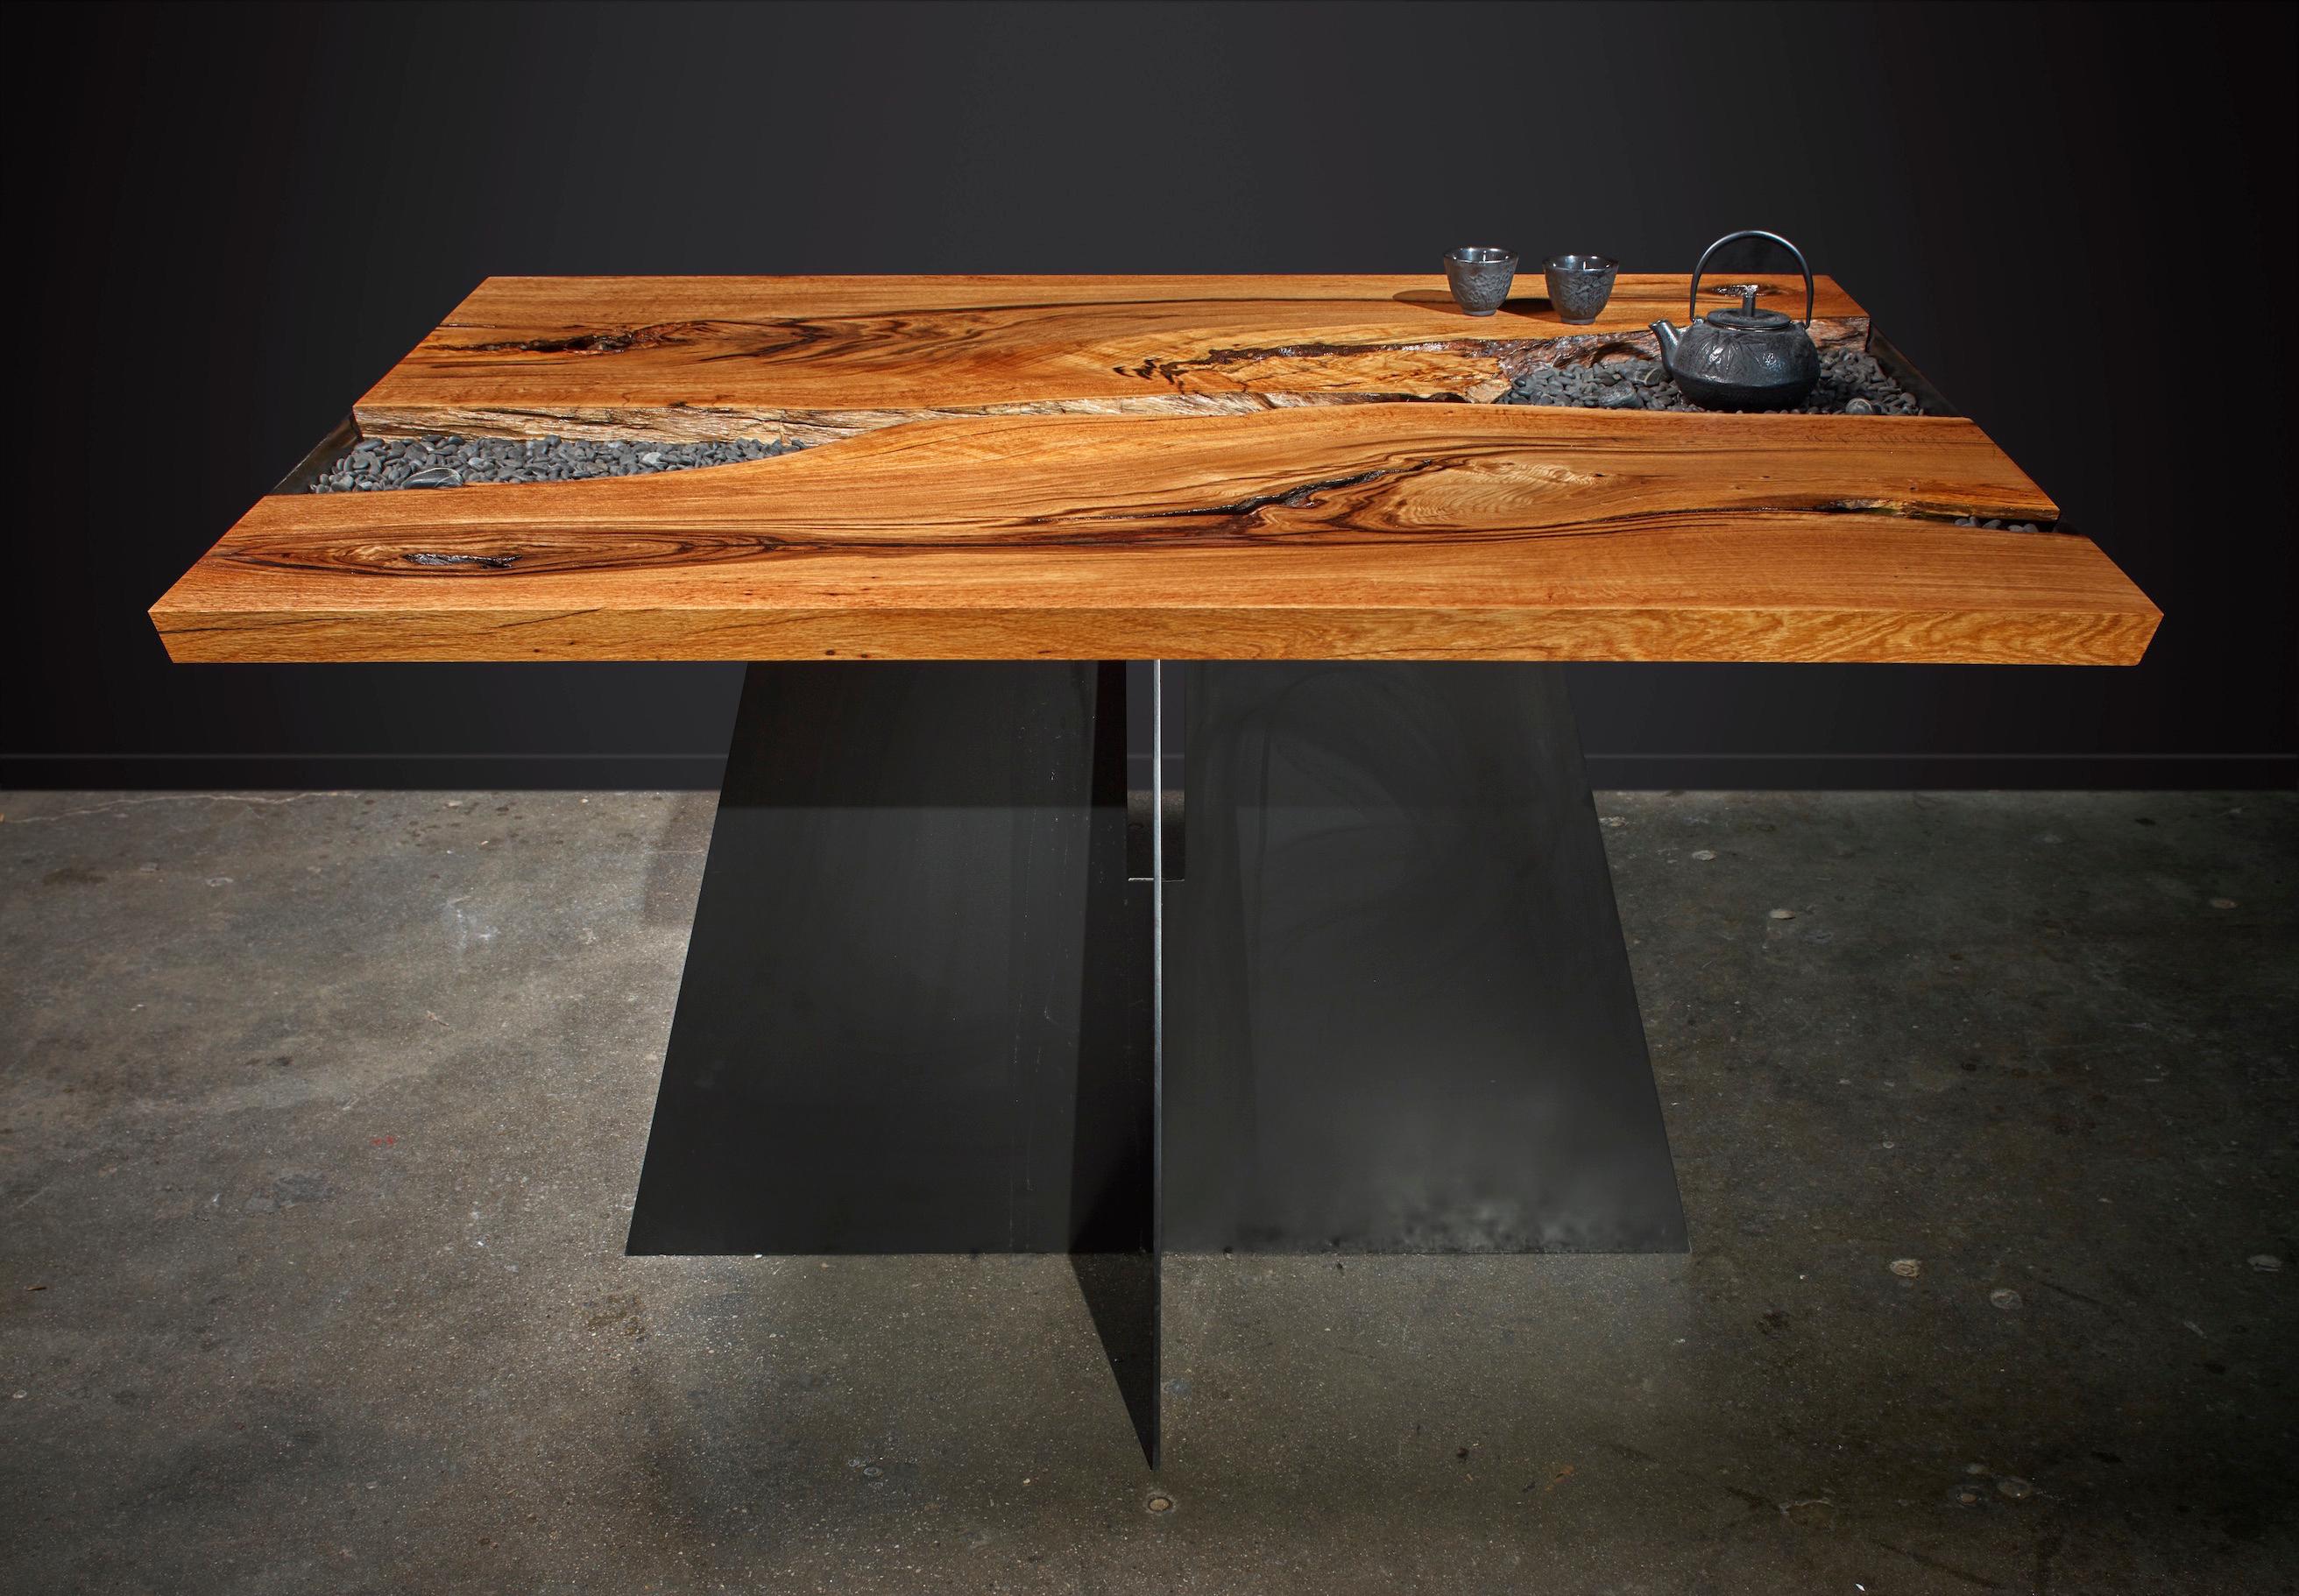 Hand-Crafted Organic Modern Dining Table with California White Oak and Aluminum: Wisdom